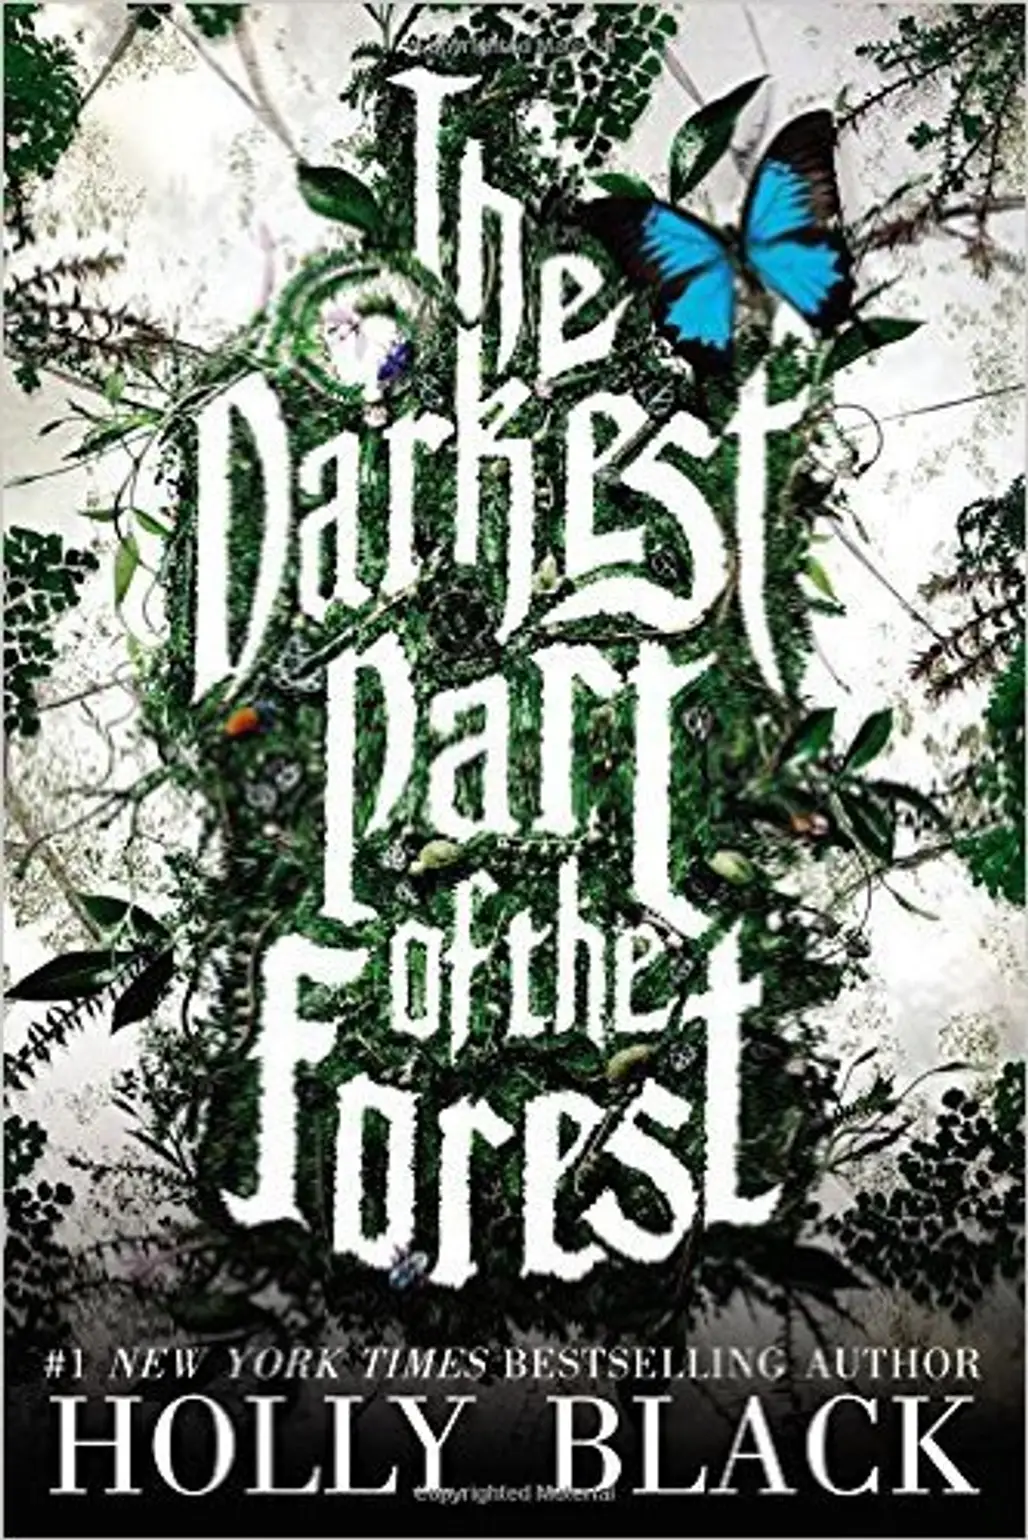 The Darkest Part of the Forest (Holly Black)